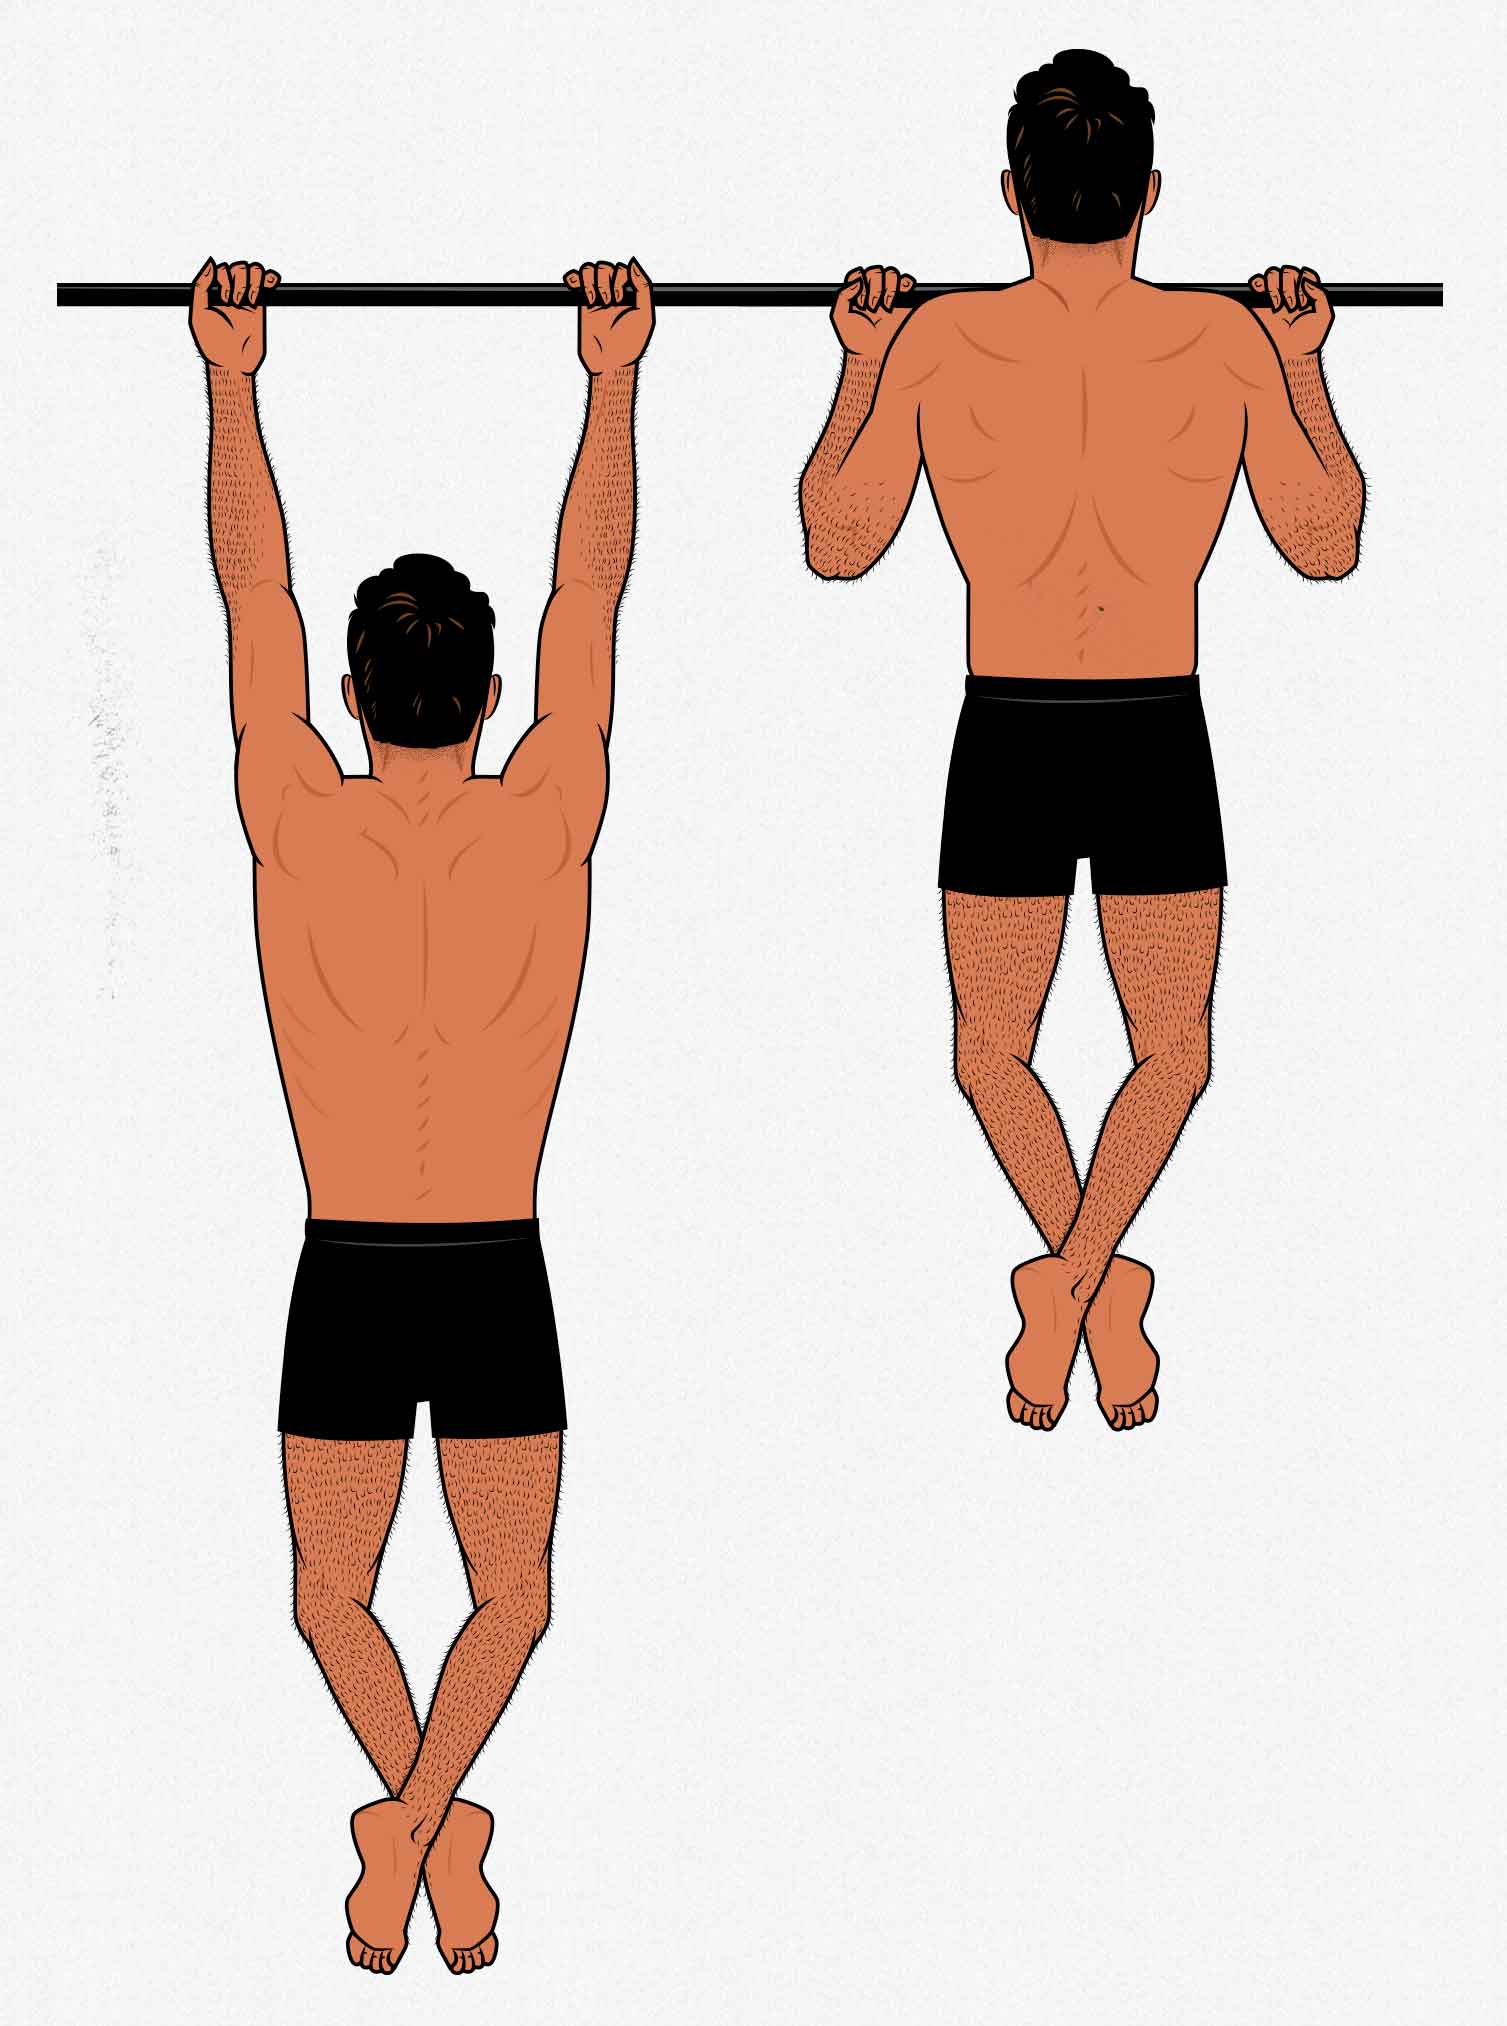 Illustration showing how to do chin-ups to build muscle in the upper back and biceps.